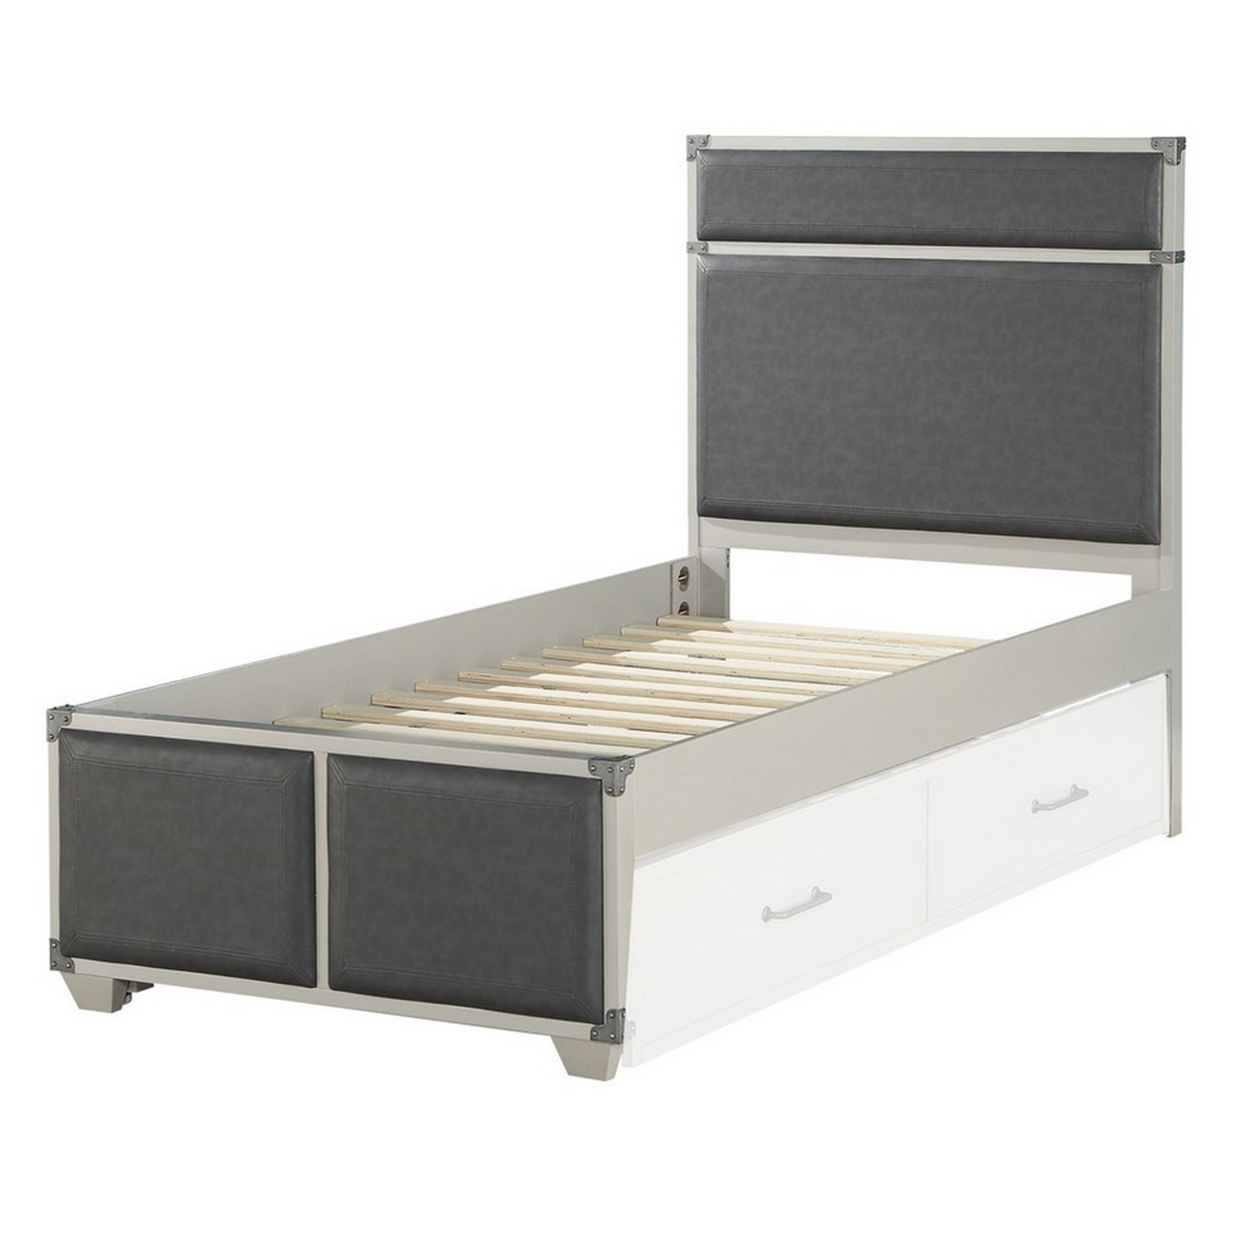 Wooden Twin Bed With Fabric Padding, White And Gray- Saltoro Sherpi